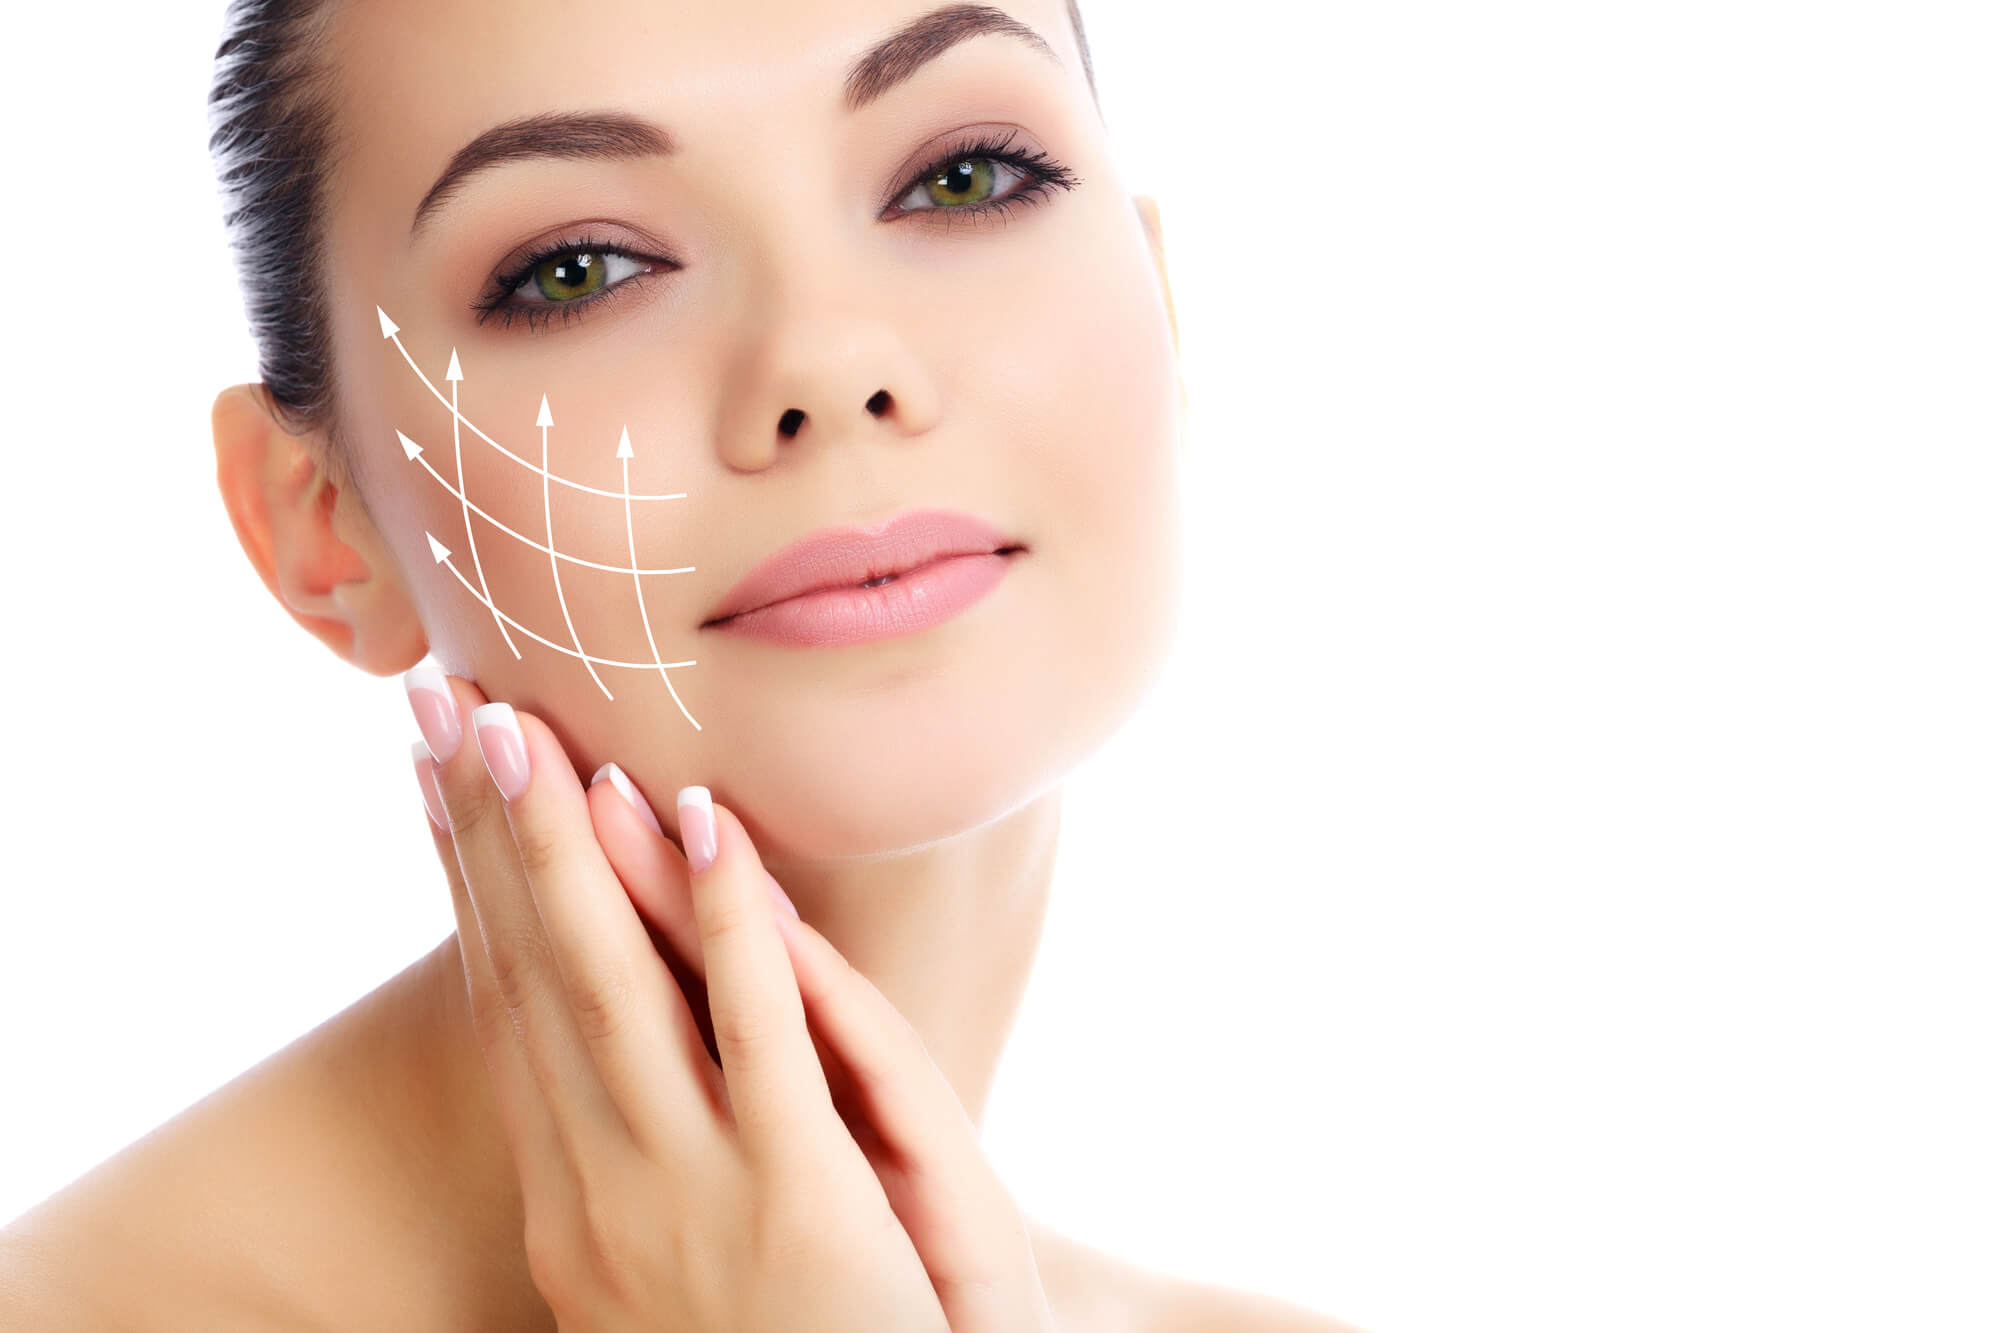 How to Reduce Swelling After a Facelift Surgery